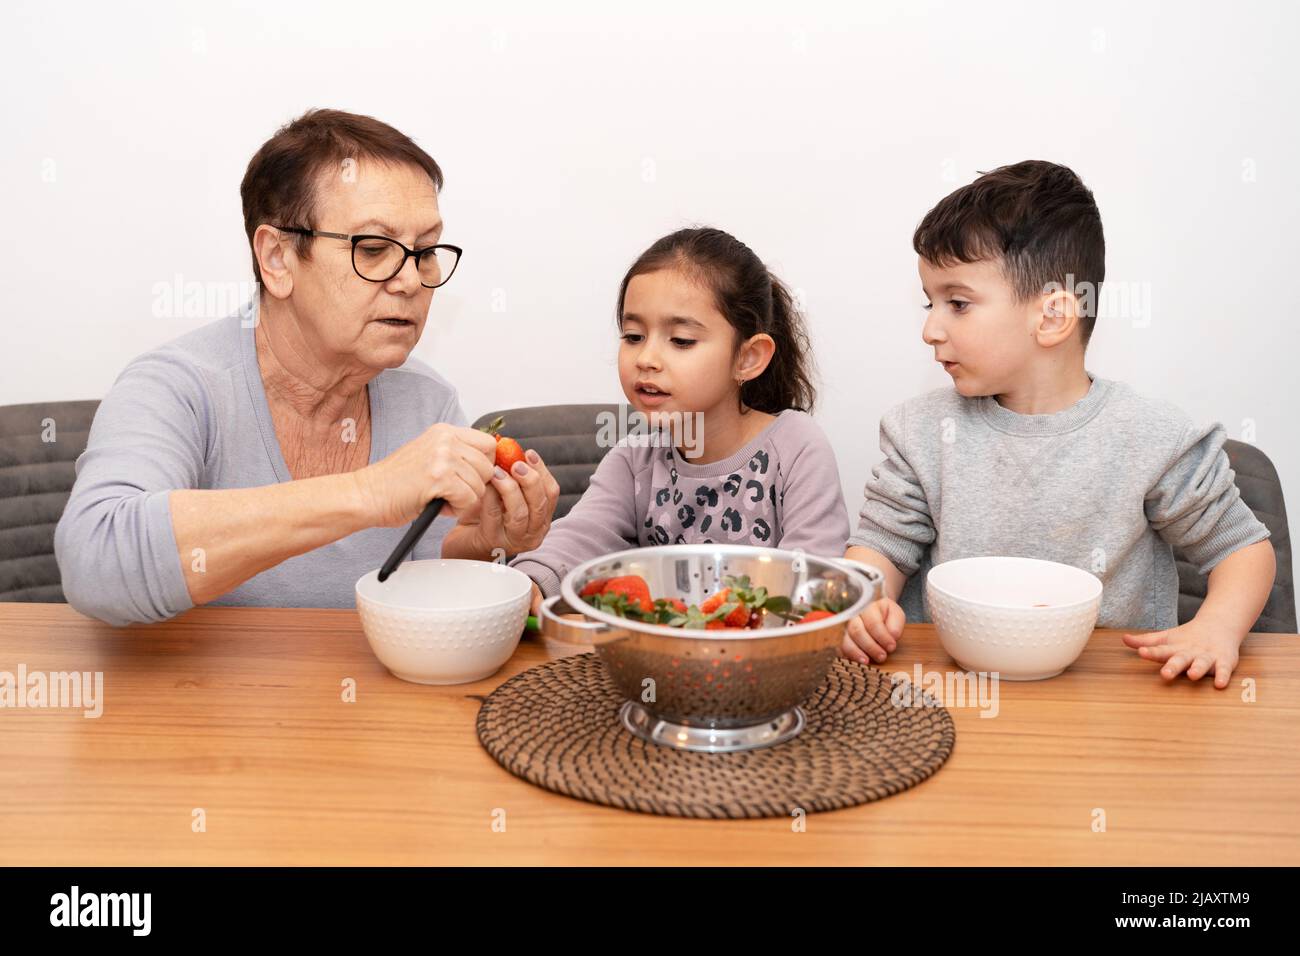 Senior woman and two little children in the kitchen cutting fruit salad. Grandmother and grandchildren cook strawberry jam together. Stock Photo